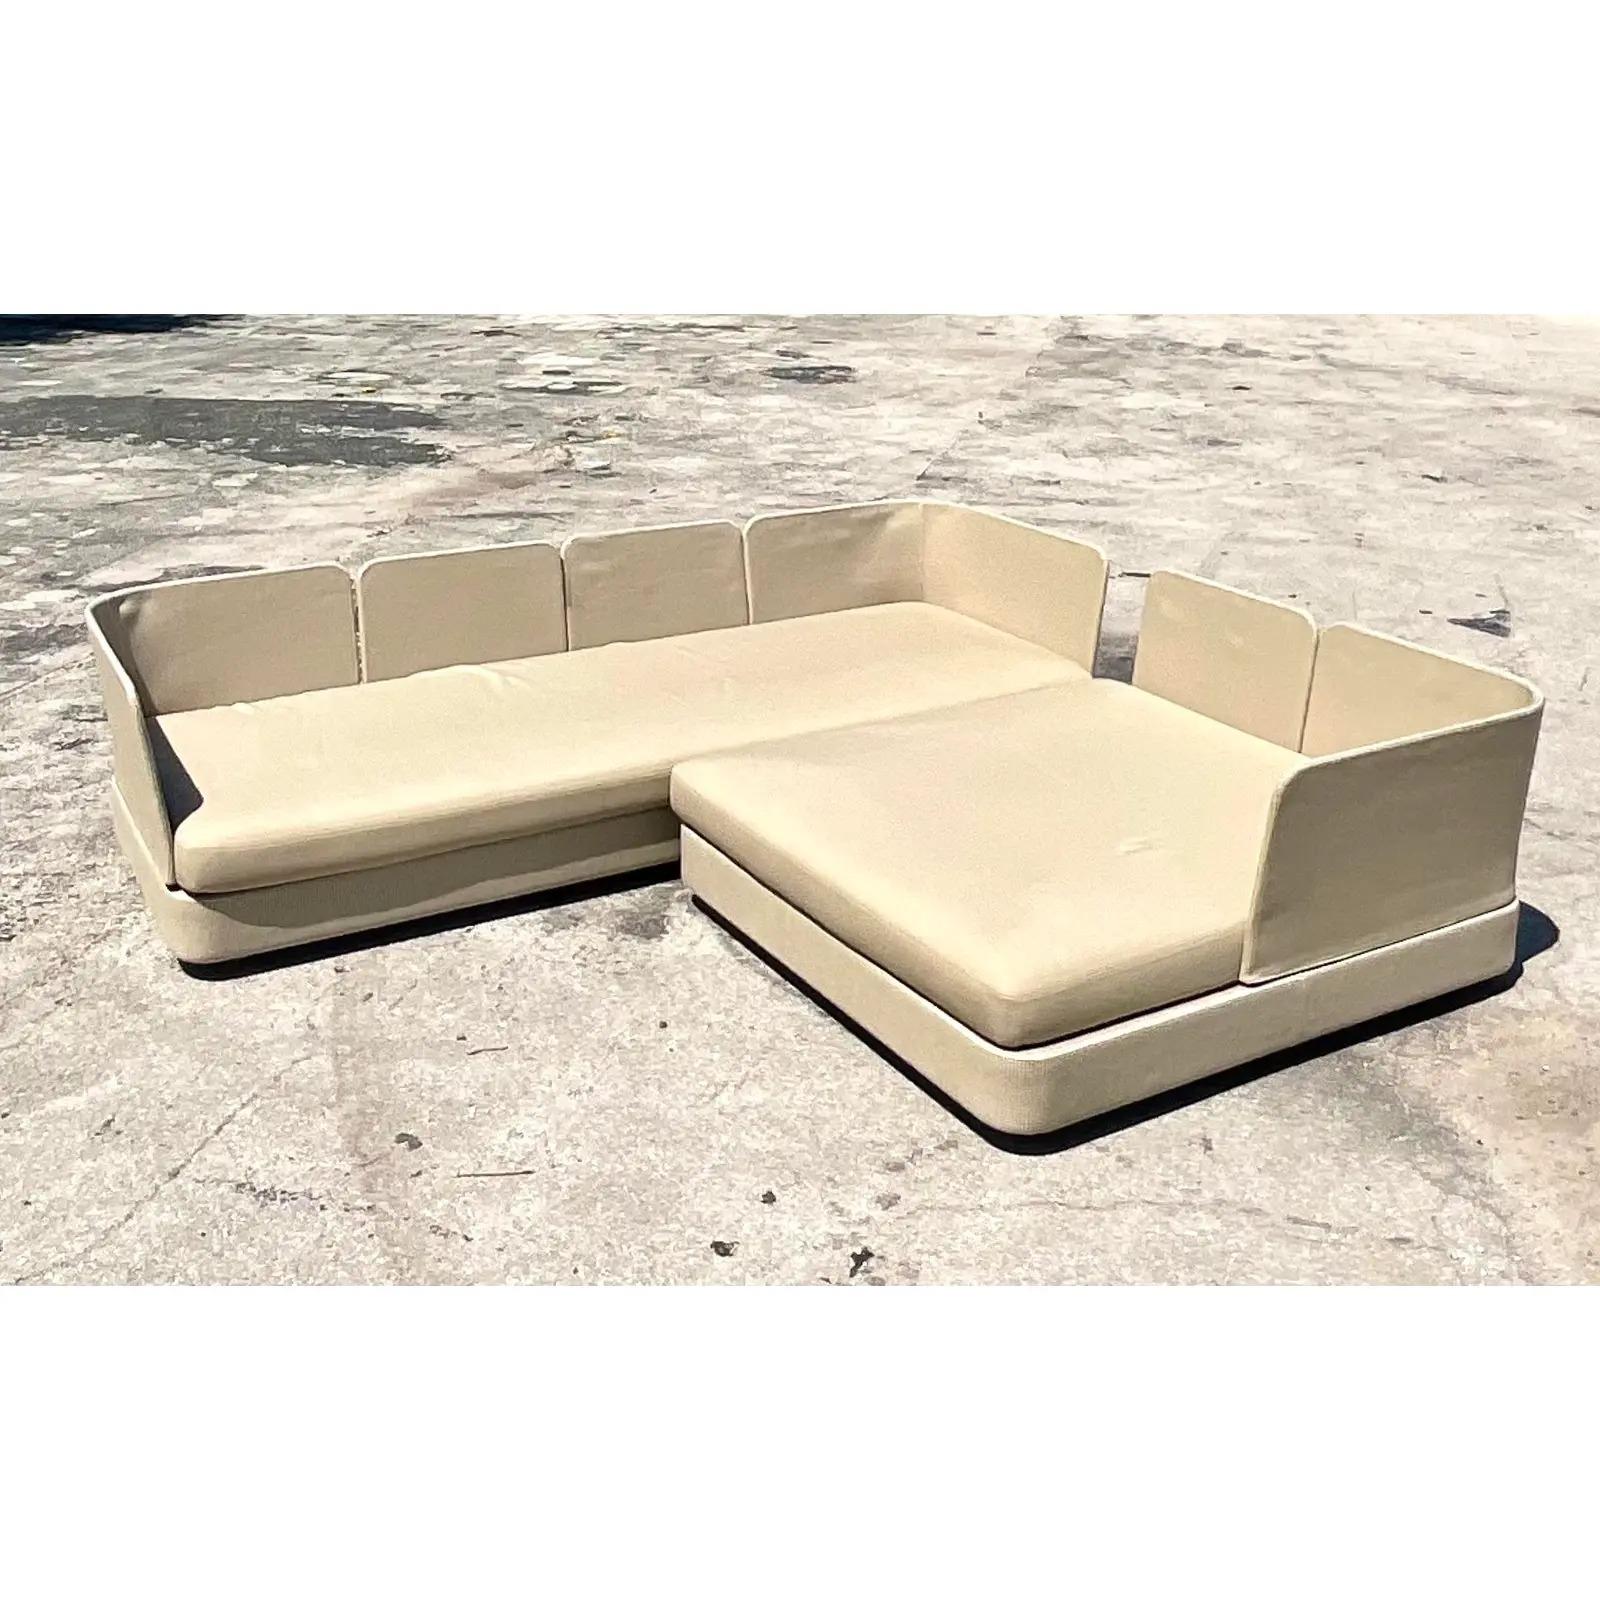 Fantastic Contemporary outdoor Cove sectional sofa. Made by the talented Paola Lenti. Beautiful monumental shape with interchangeable panels. Move them around to create the mood you are looking for. Separate the pieces to create two separate areas.